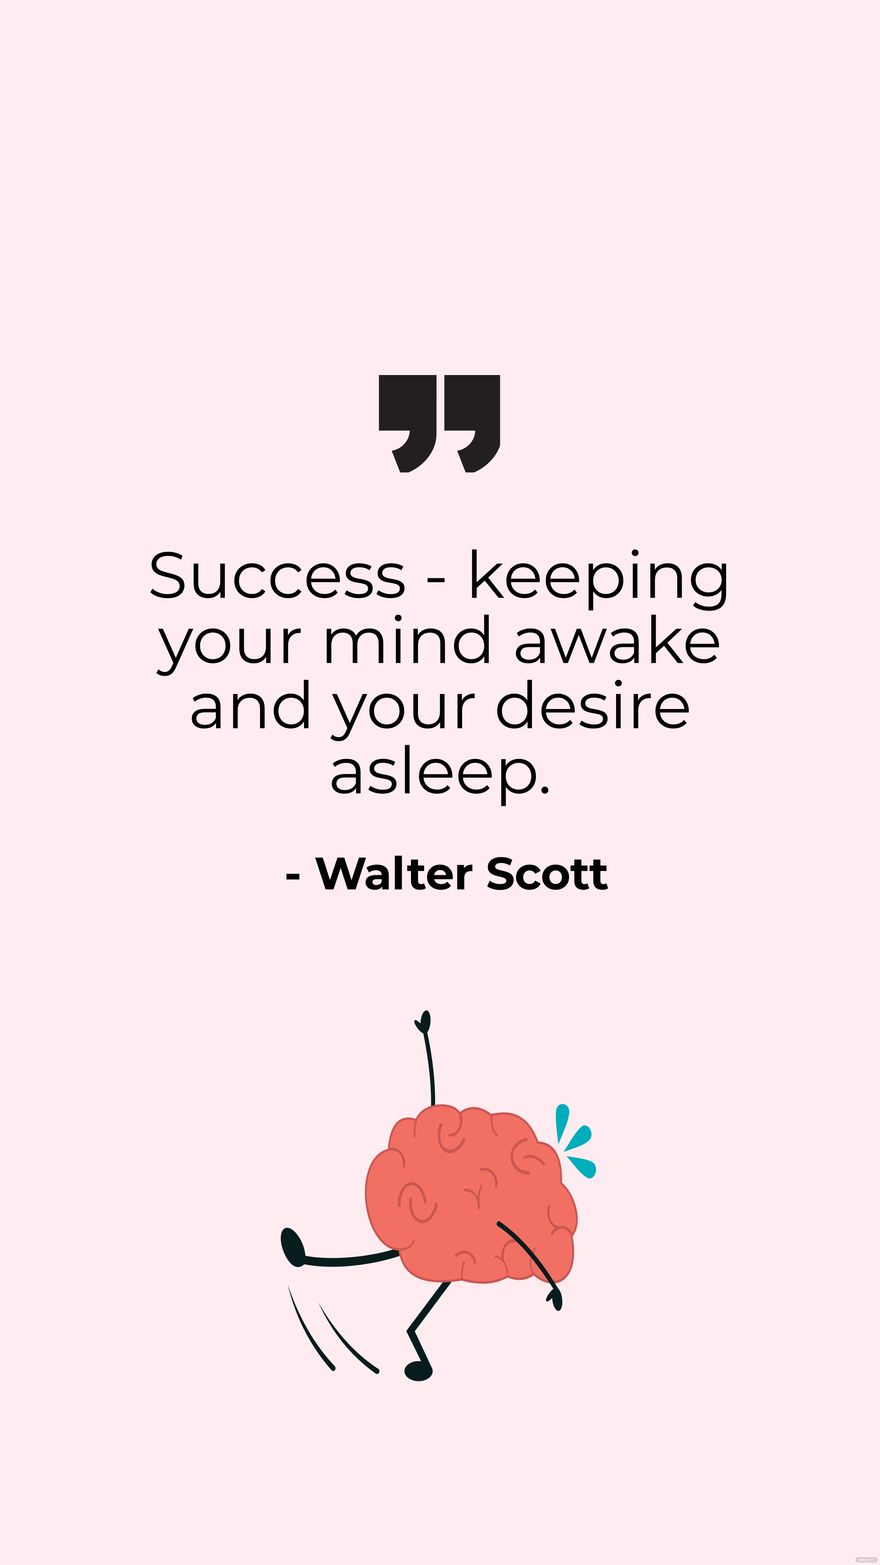 Free Walter Scott-Success - keeping your mind awake and your desire asleep. in JPG